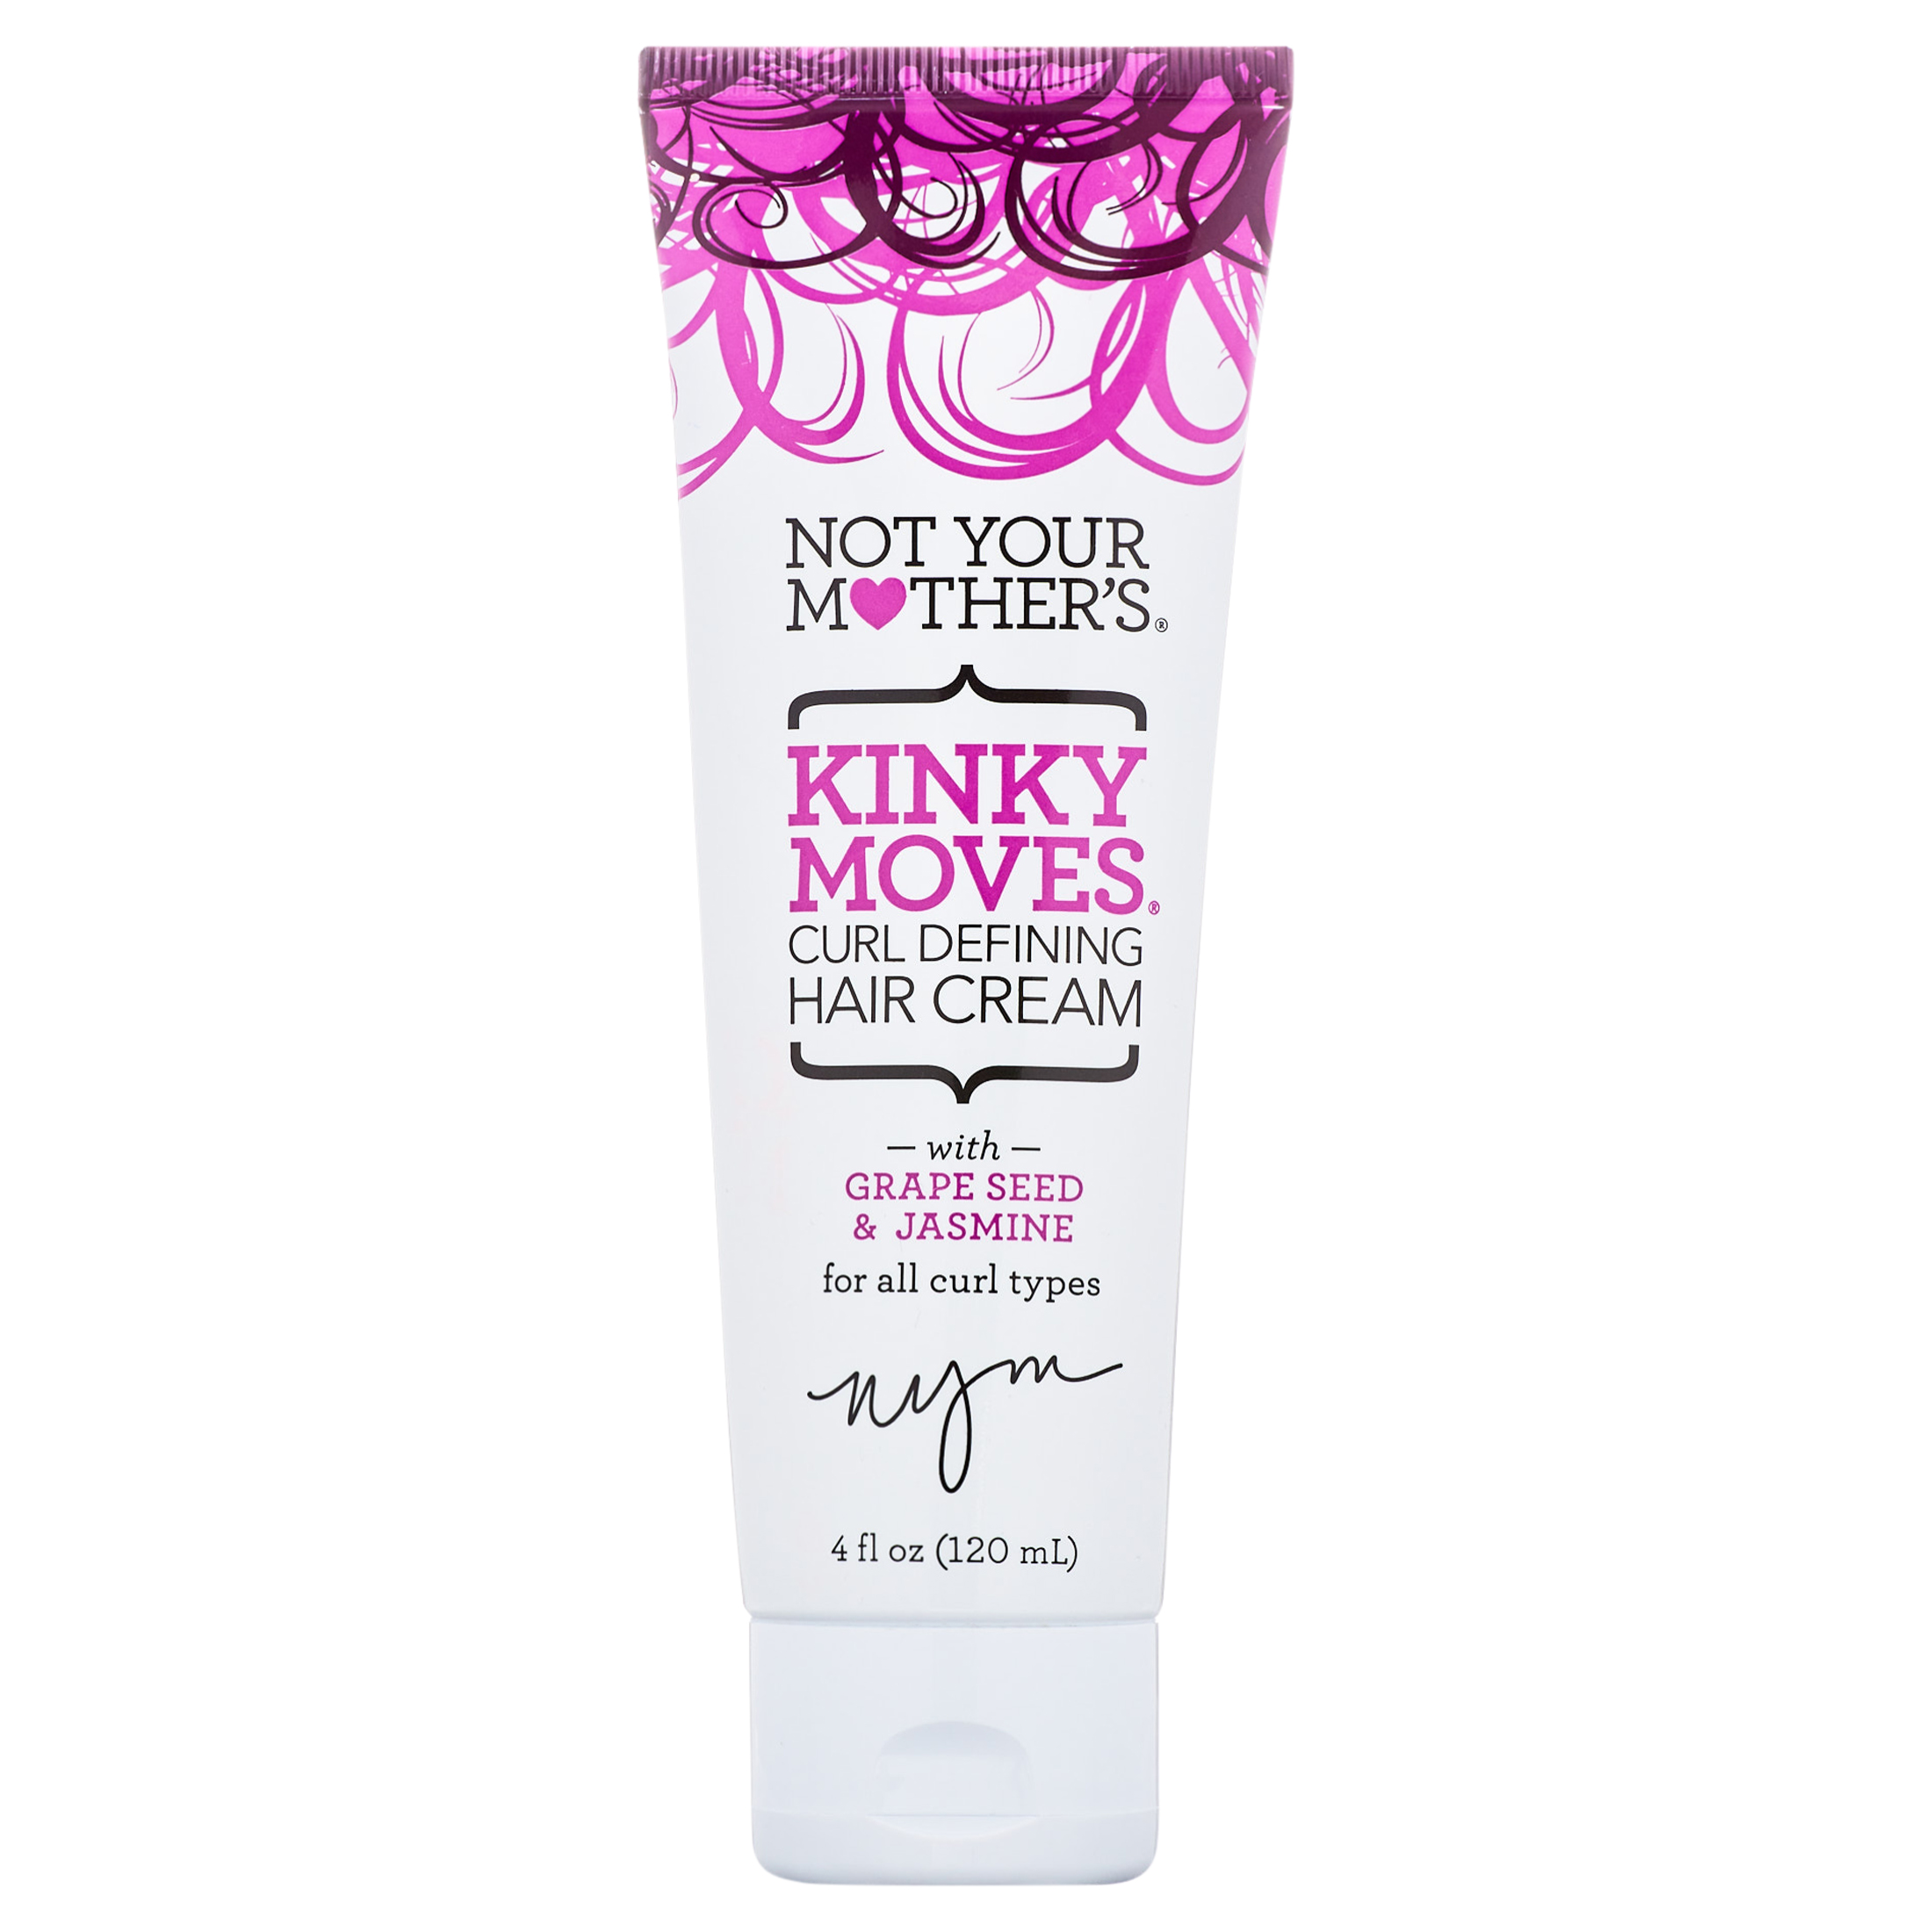 Not Your Mother's Kinky Moves Curl Defining Hair Cream to Enhance Natural Curls, 4 fl oz - image 1 of 10